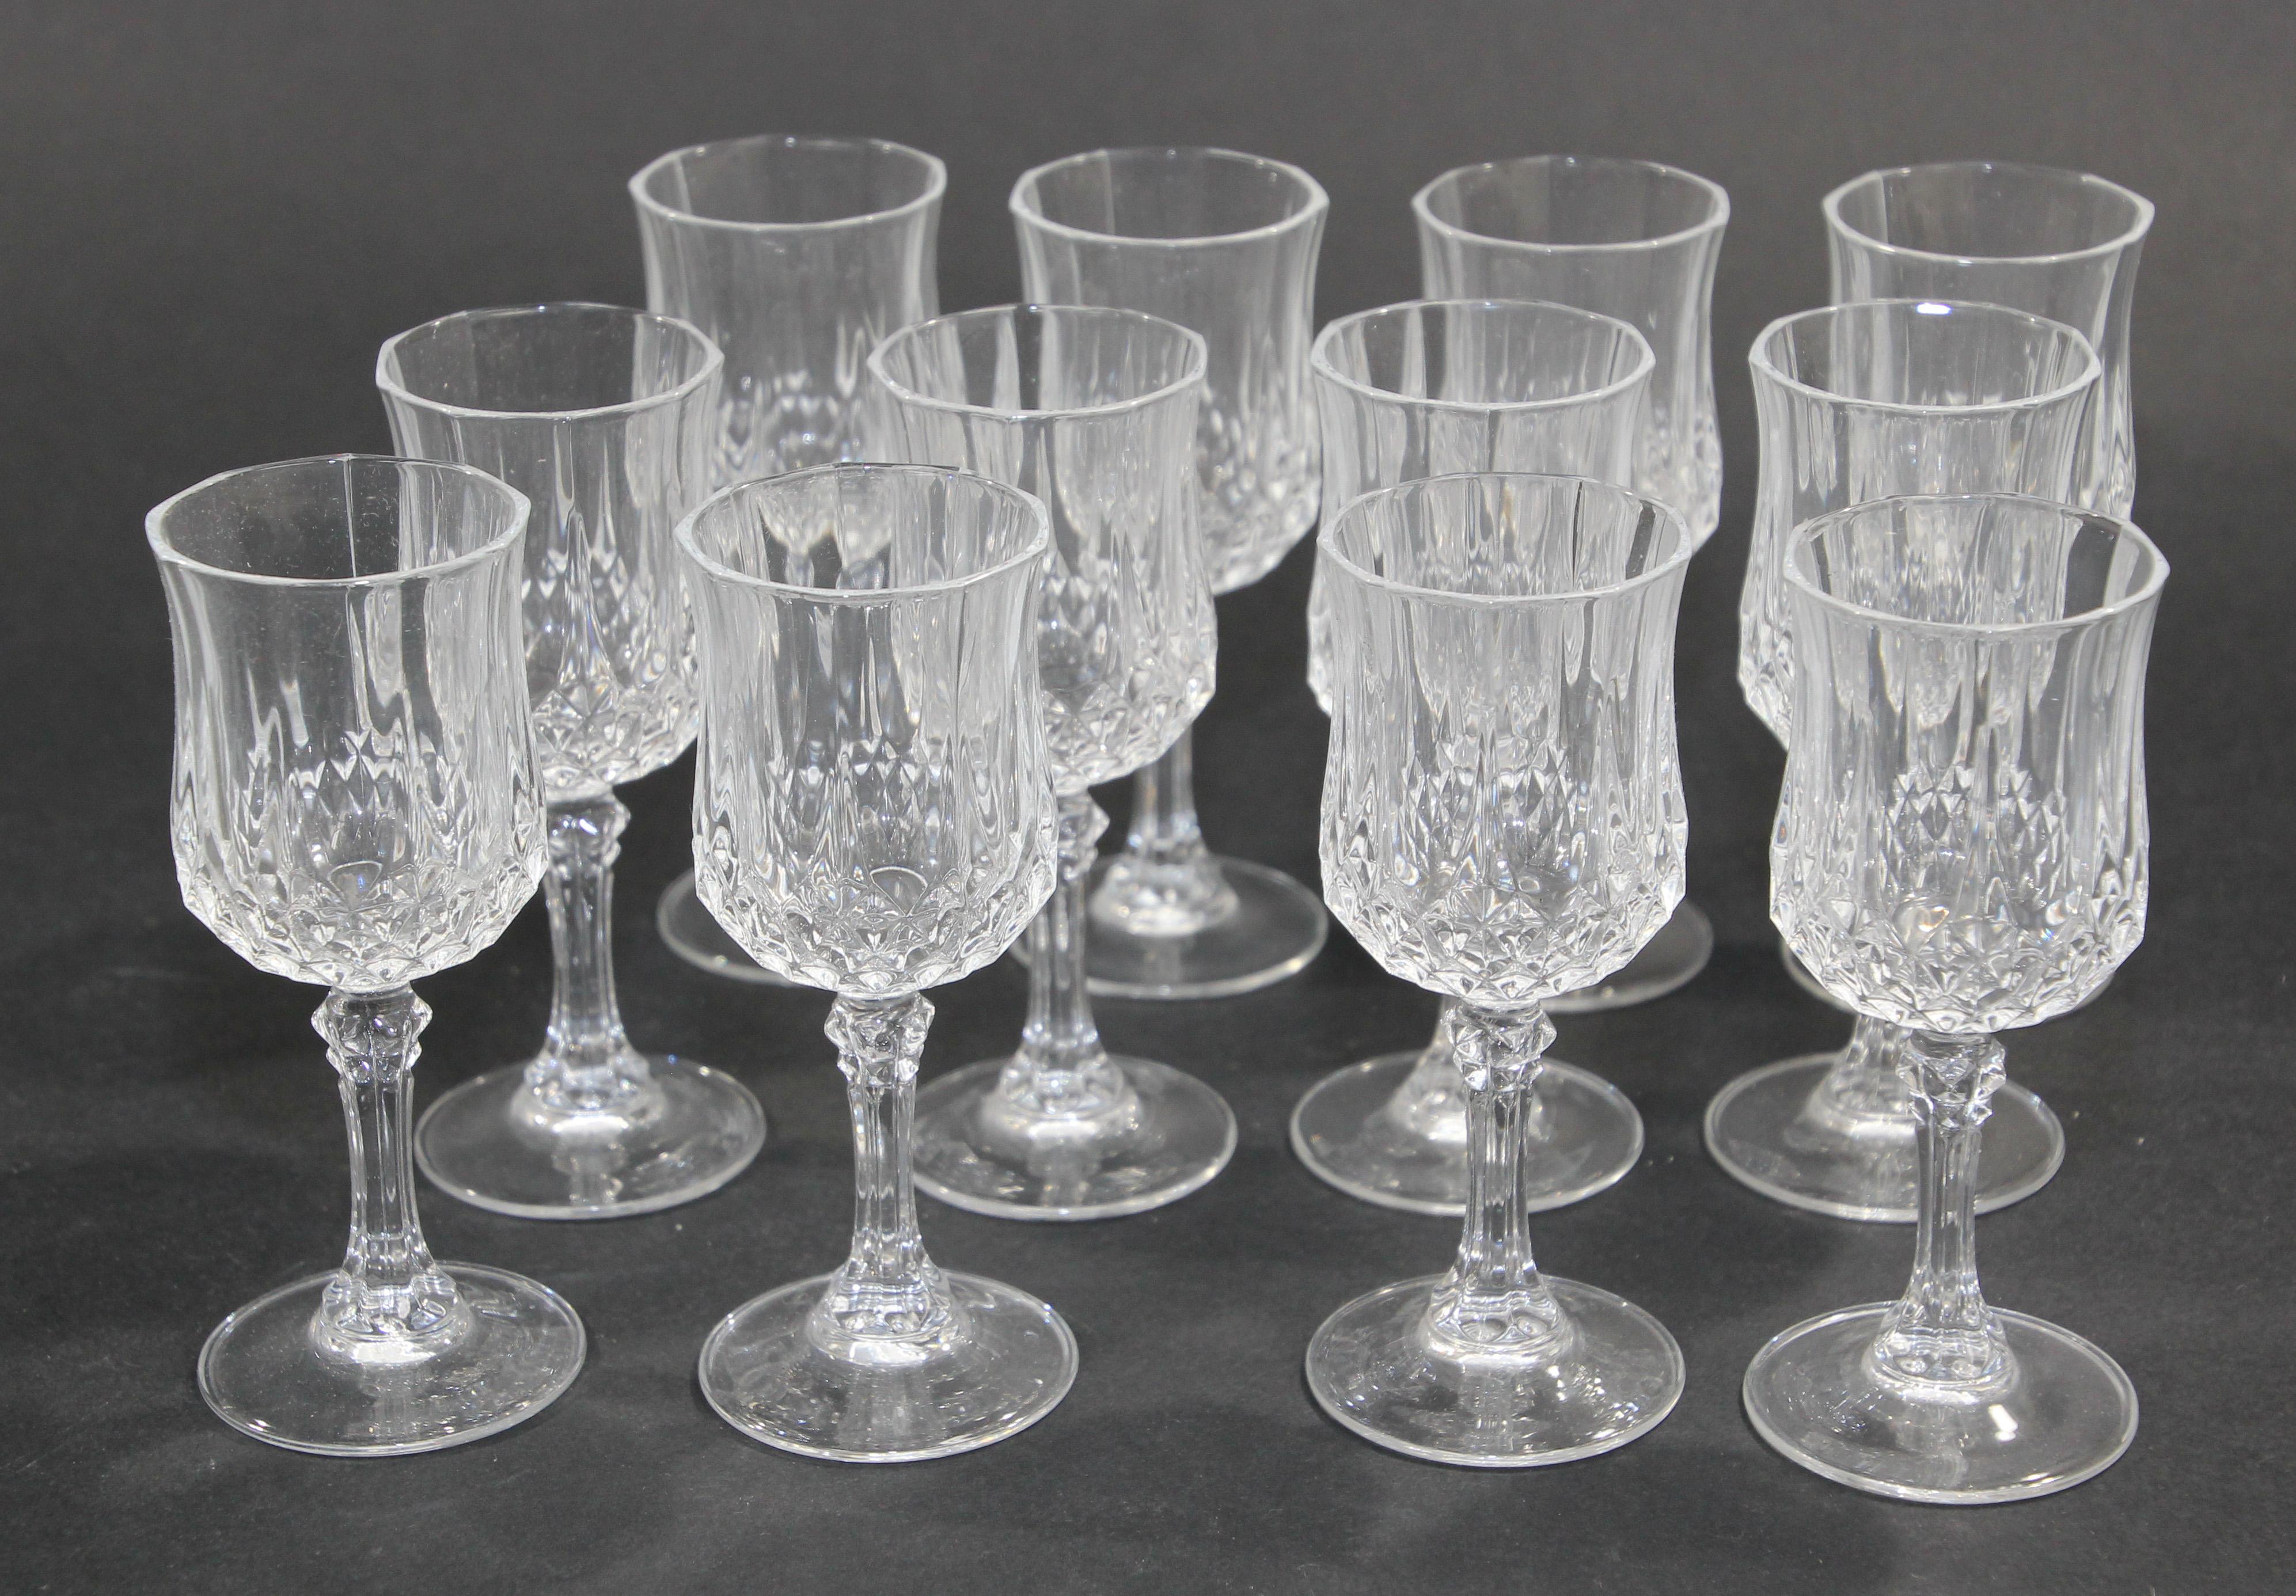 French Crystal D' Arques Longchamp Footed Drinking Glasses, set of 12